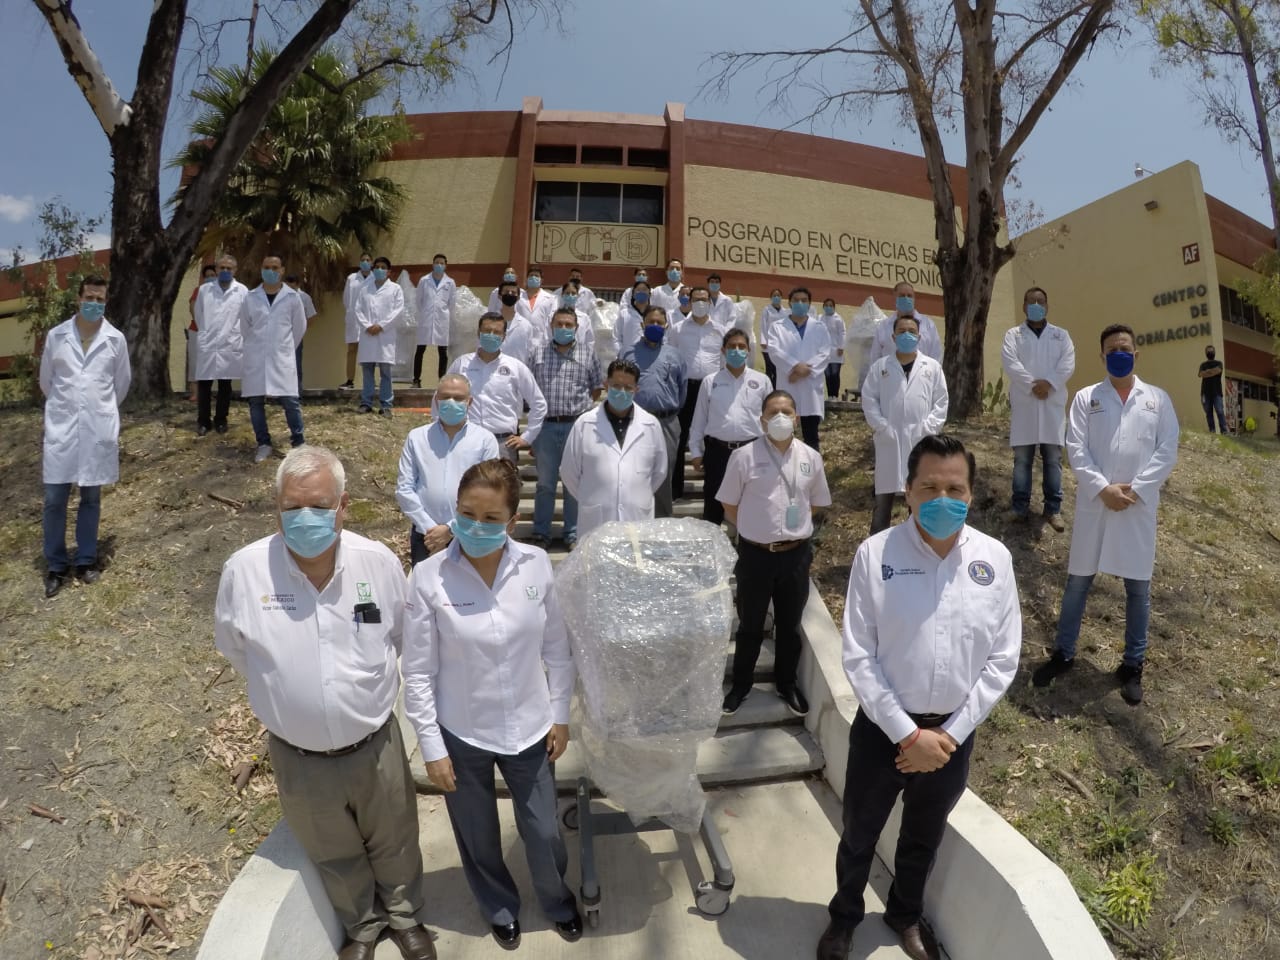 Reports that TECNM and Campus Morelia delivered lung respirators